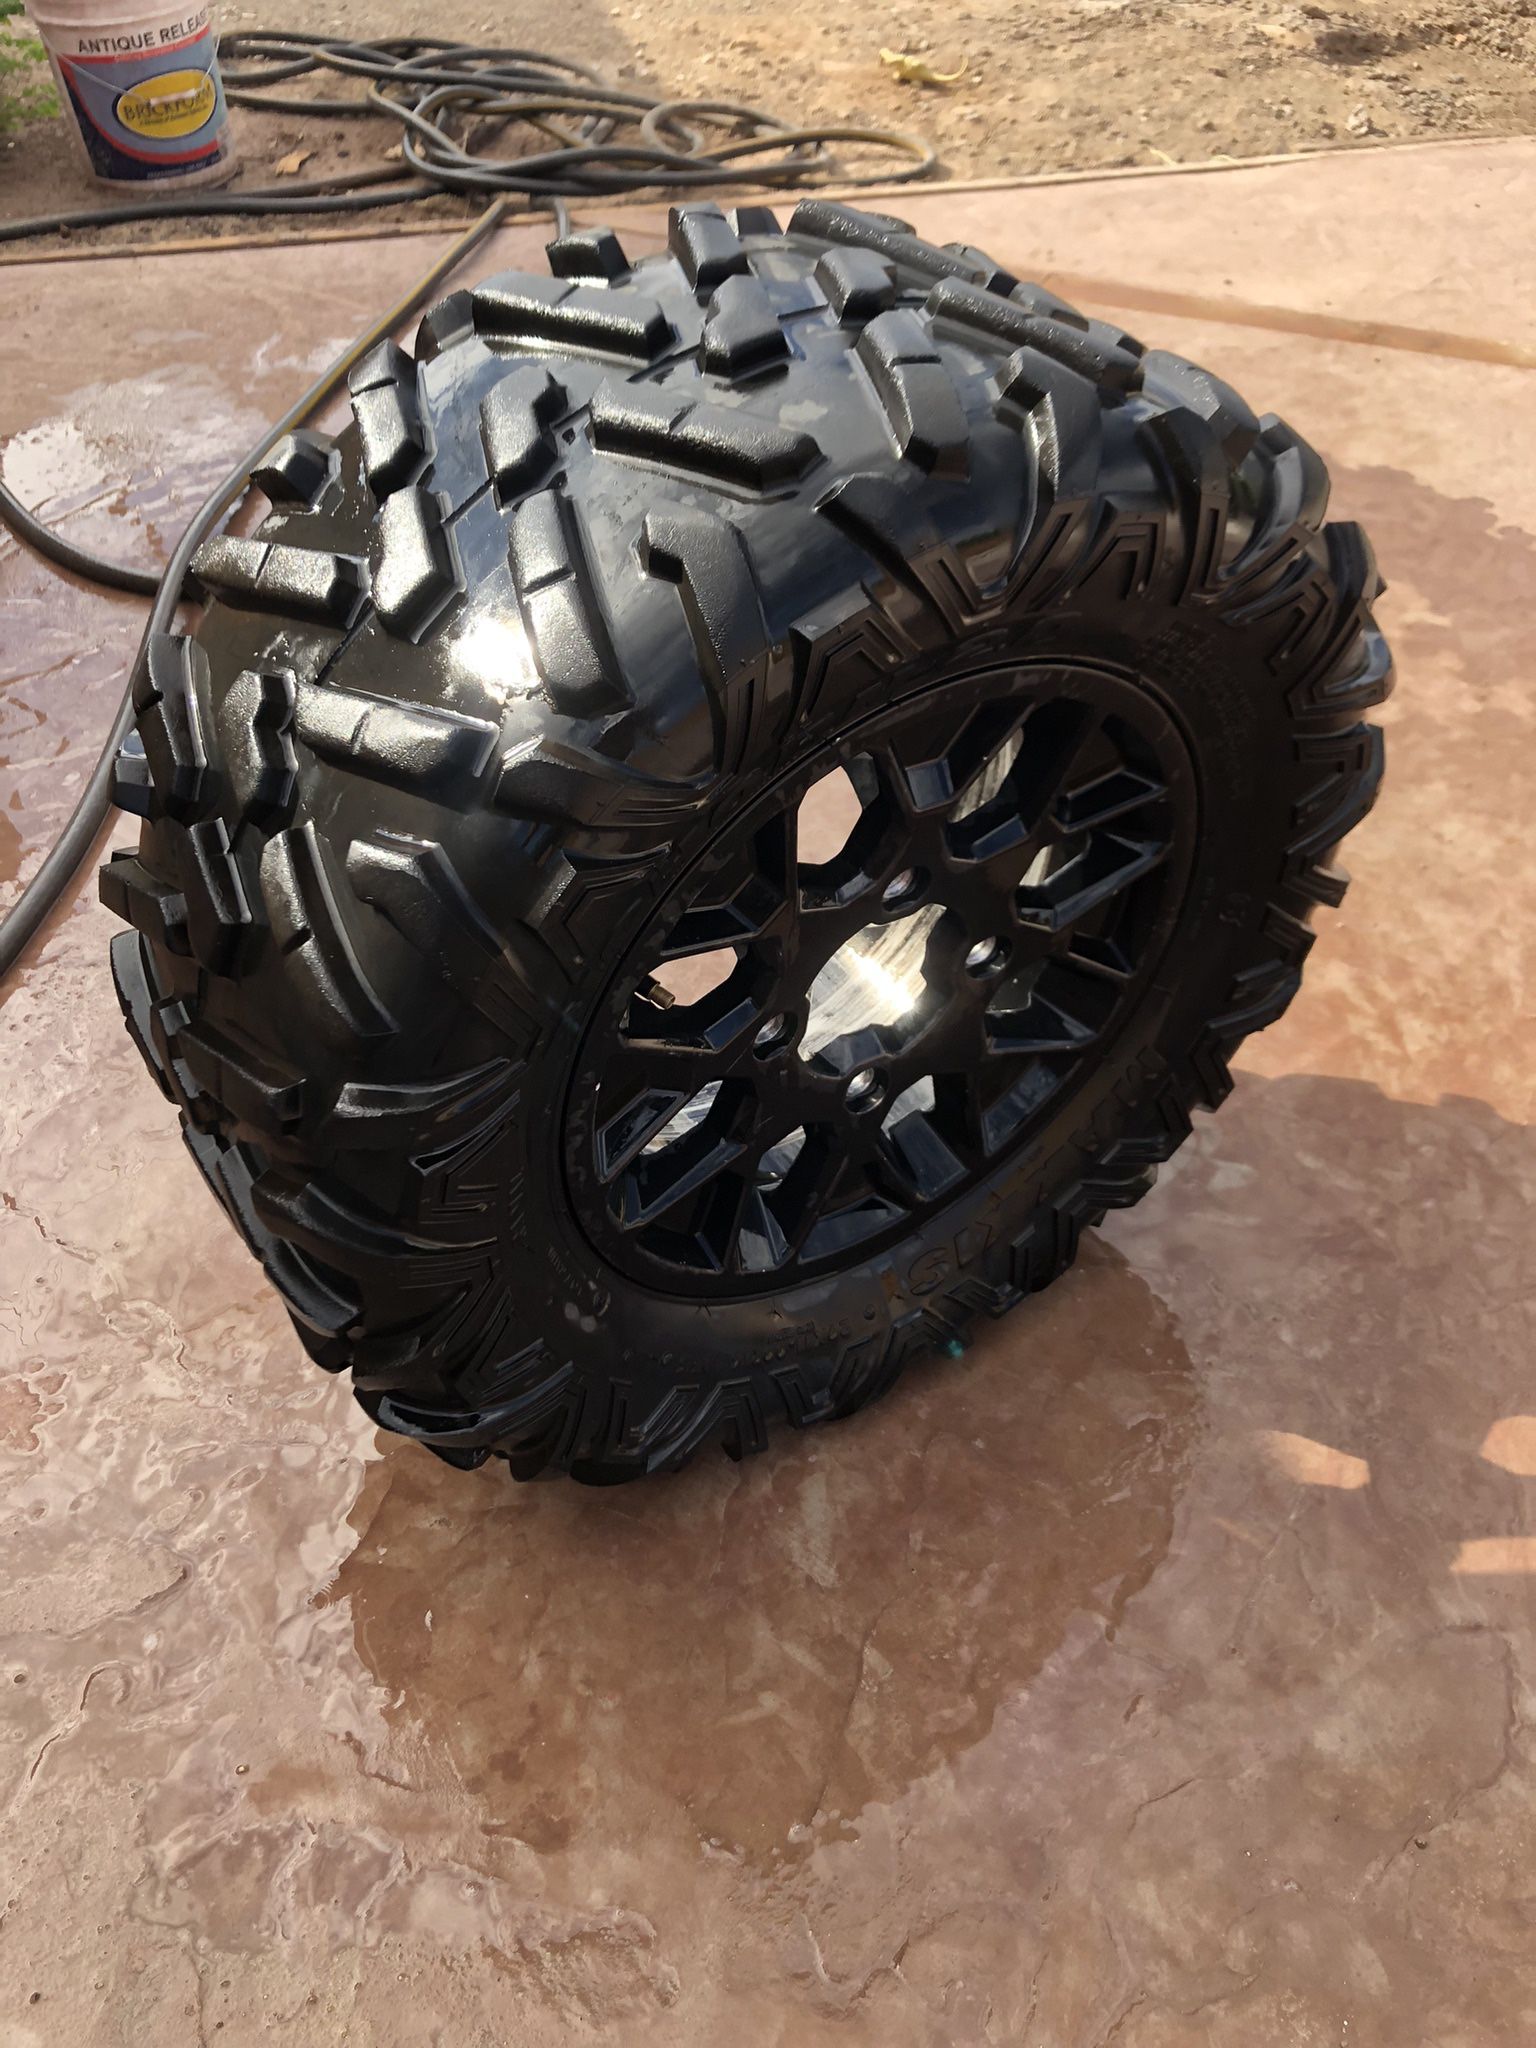 24” Black, Can-am Wheel And Tire